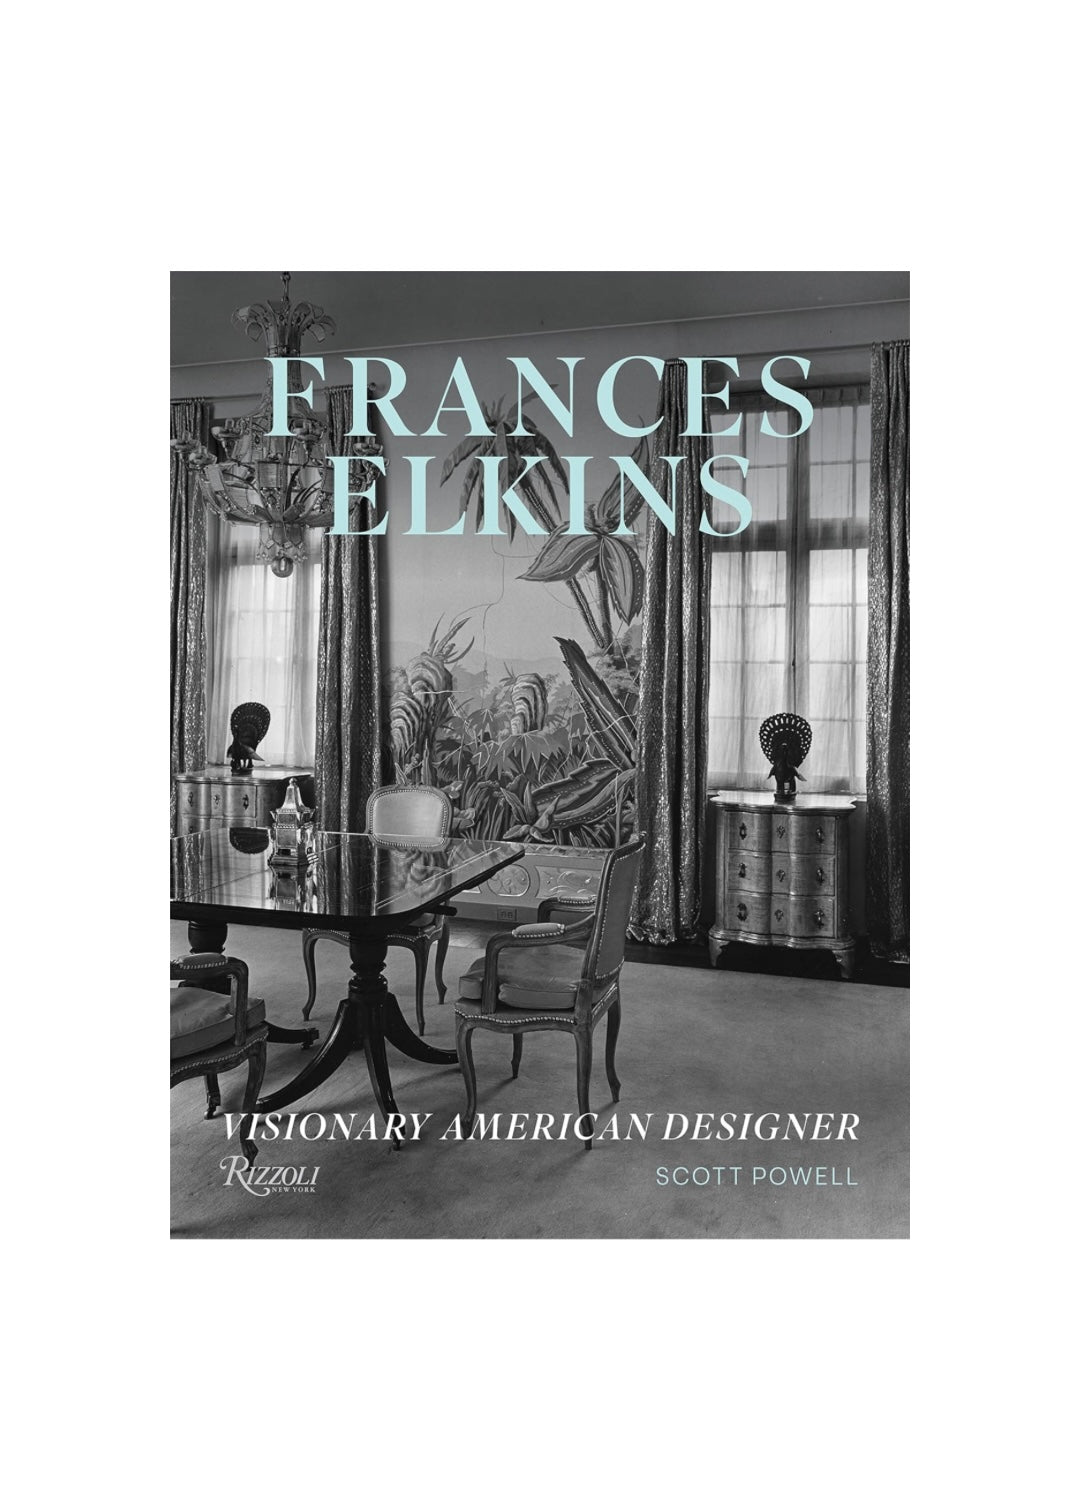 Frances Elkins: Visionary American Designer by by Scott Powell | Newport Lamp And Shade | Located in Newport, RI